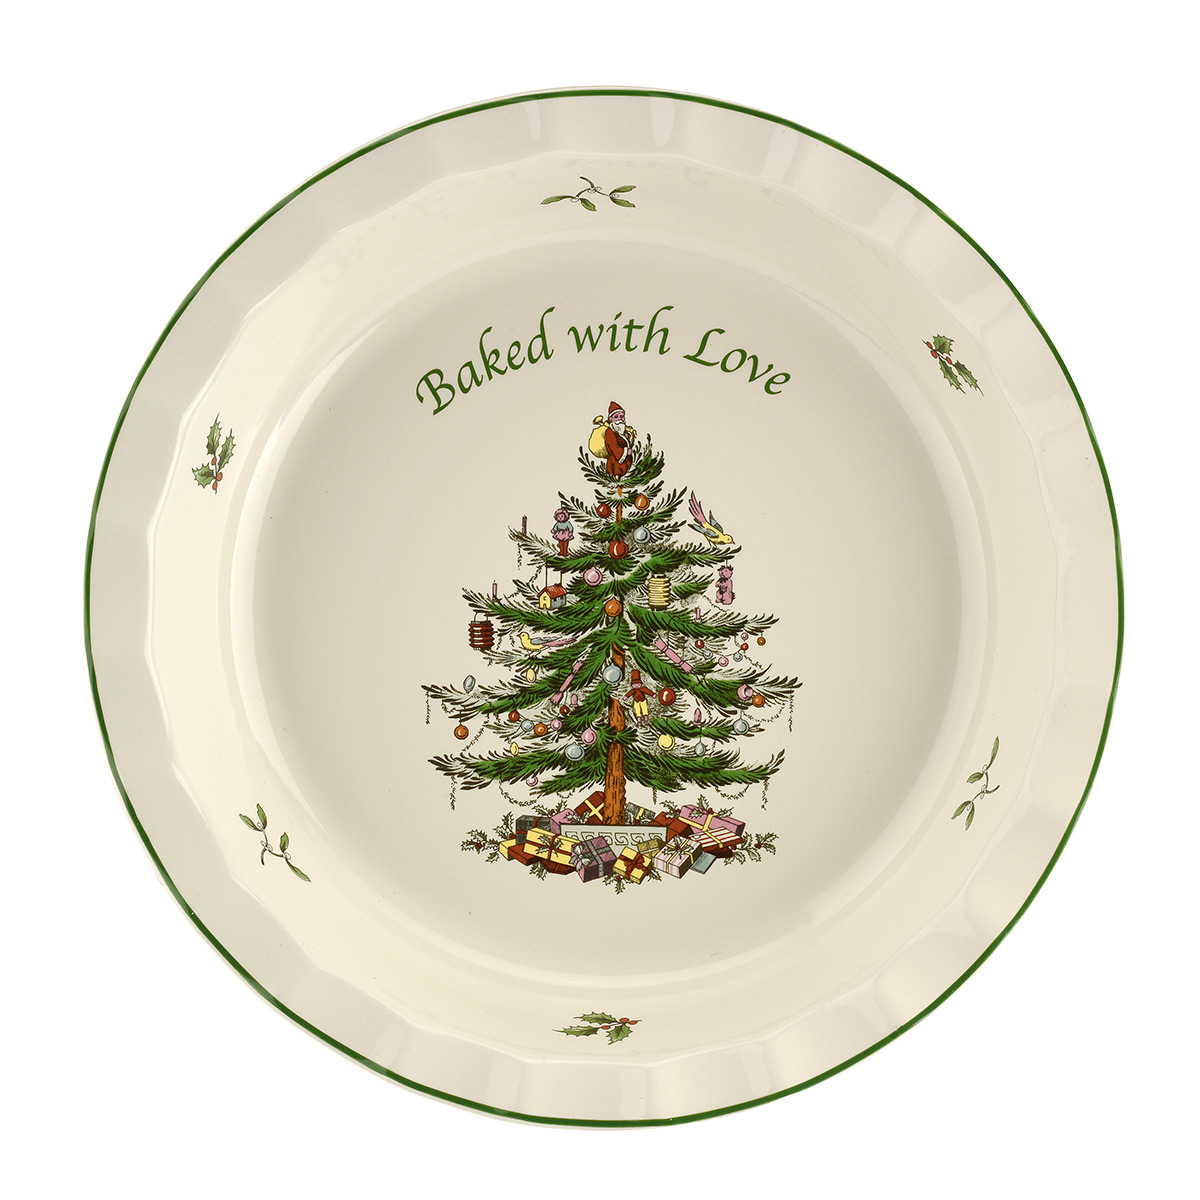 Spode Christmas Tree Bakeware Pie Dish, Baked With Love